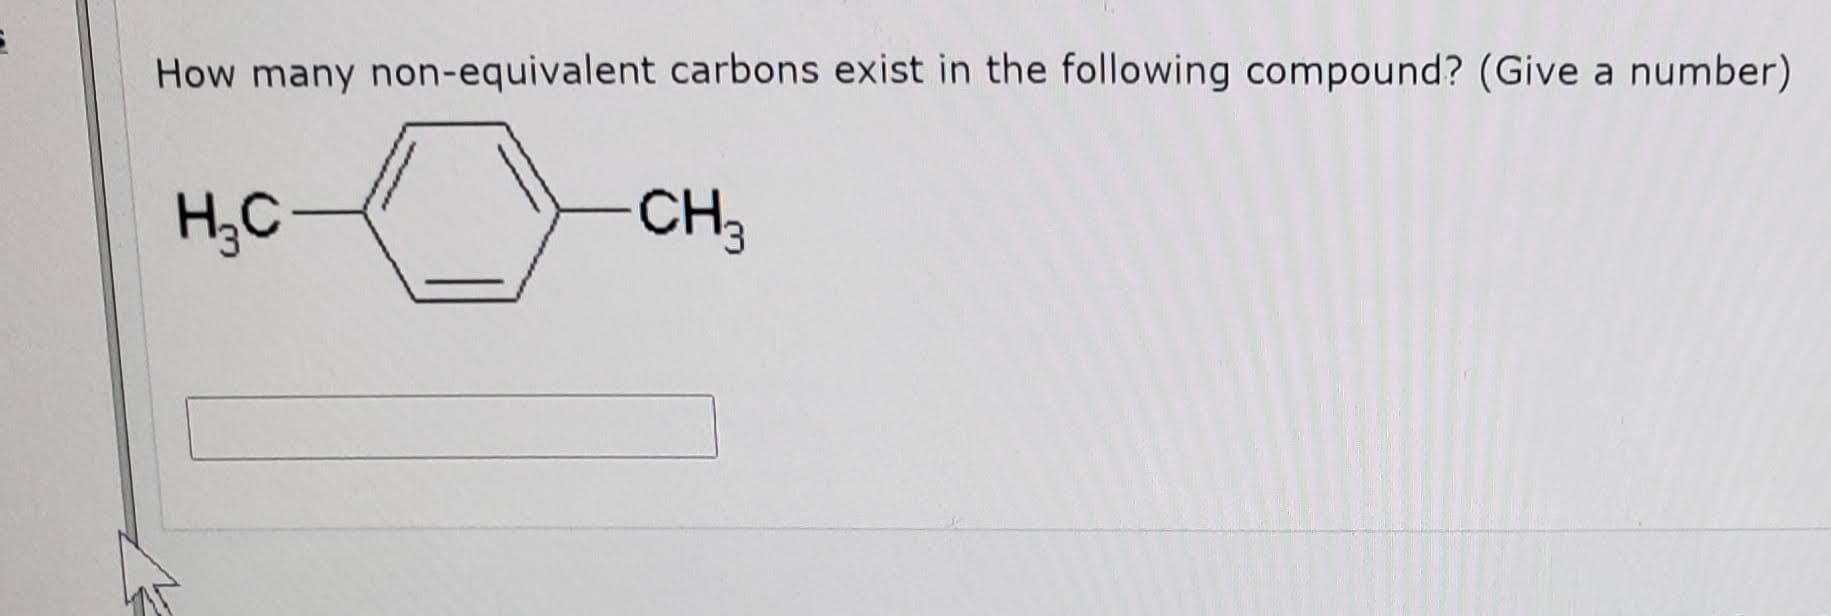 How many non-equivalent carbons exist in the following compound? (Give a number)
CH3
H,C
